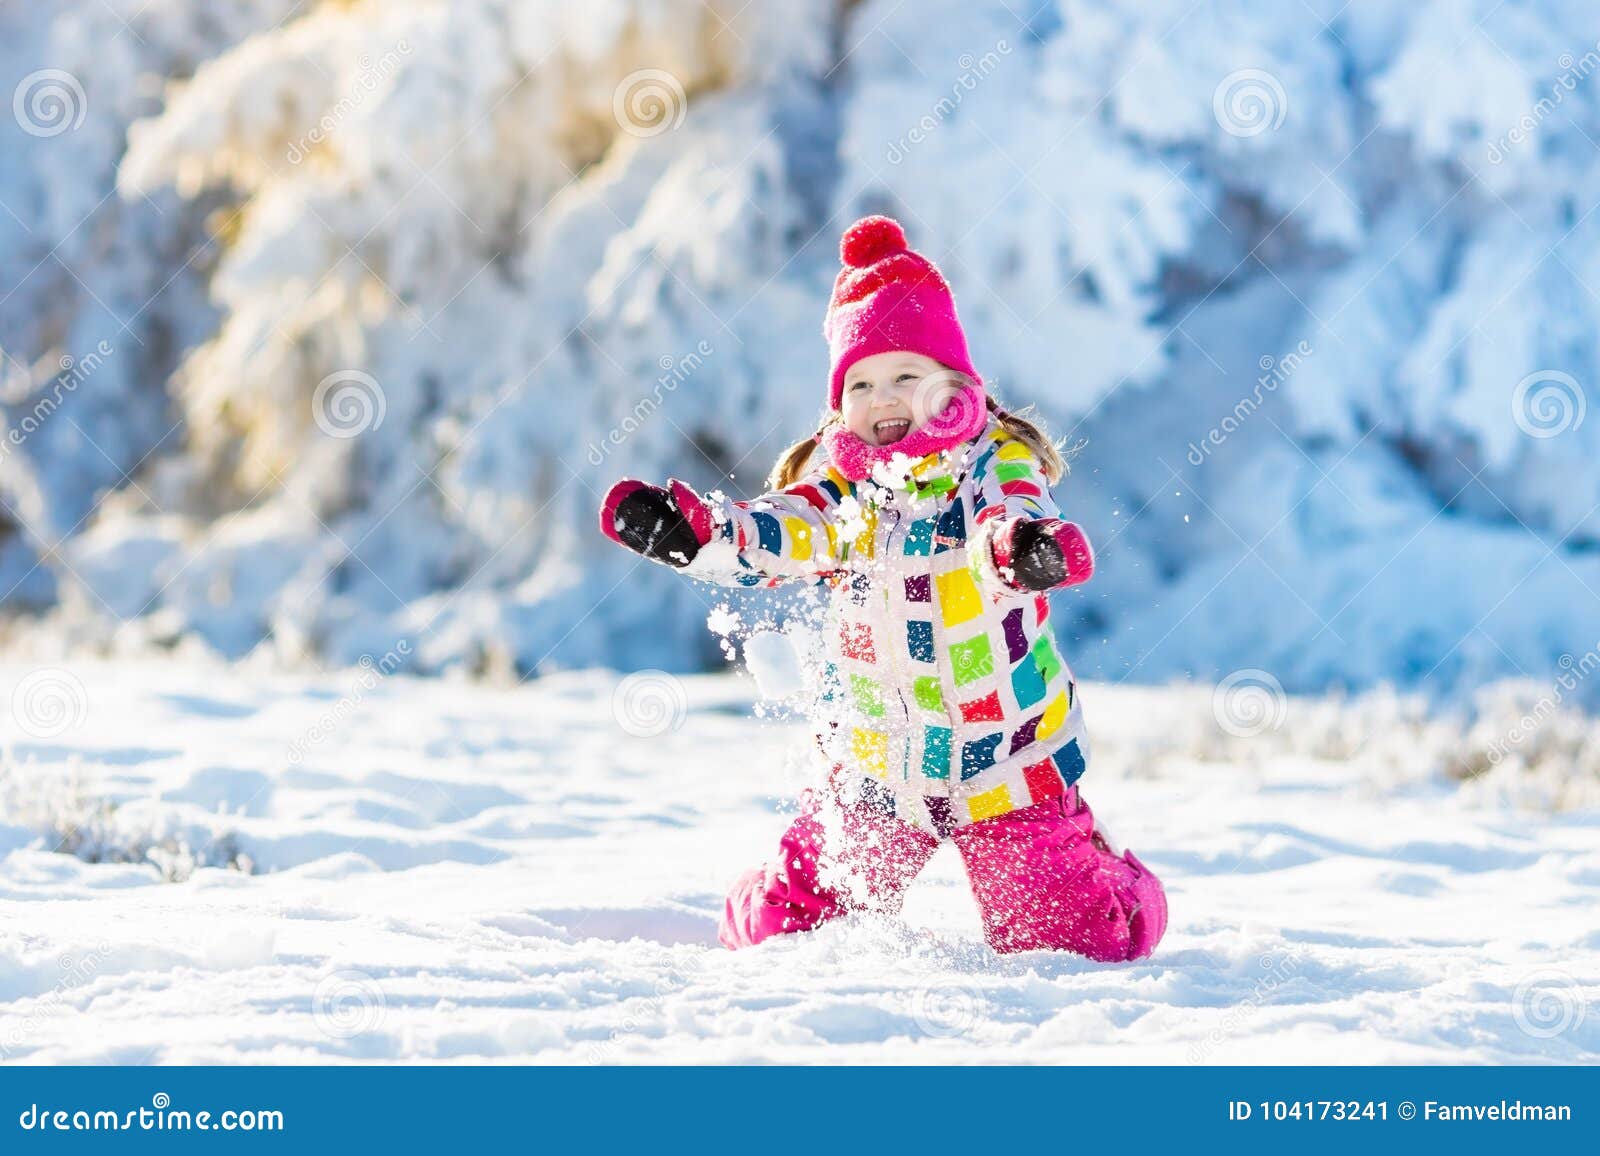 child playing with snow in winter. kids outdoors.